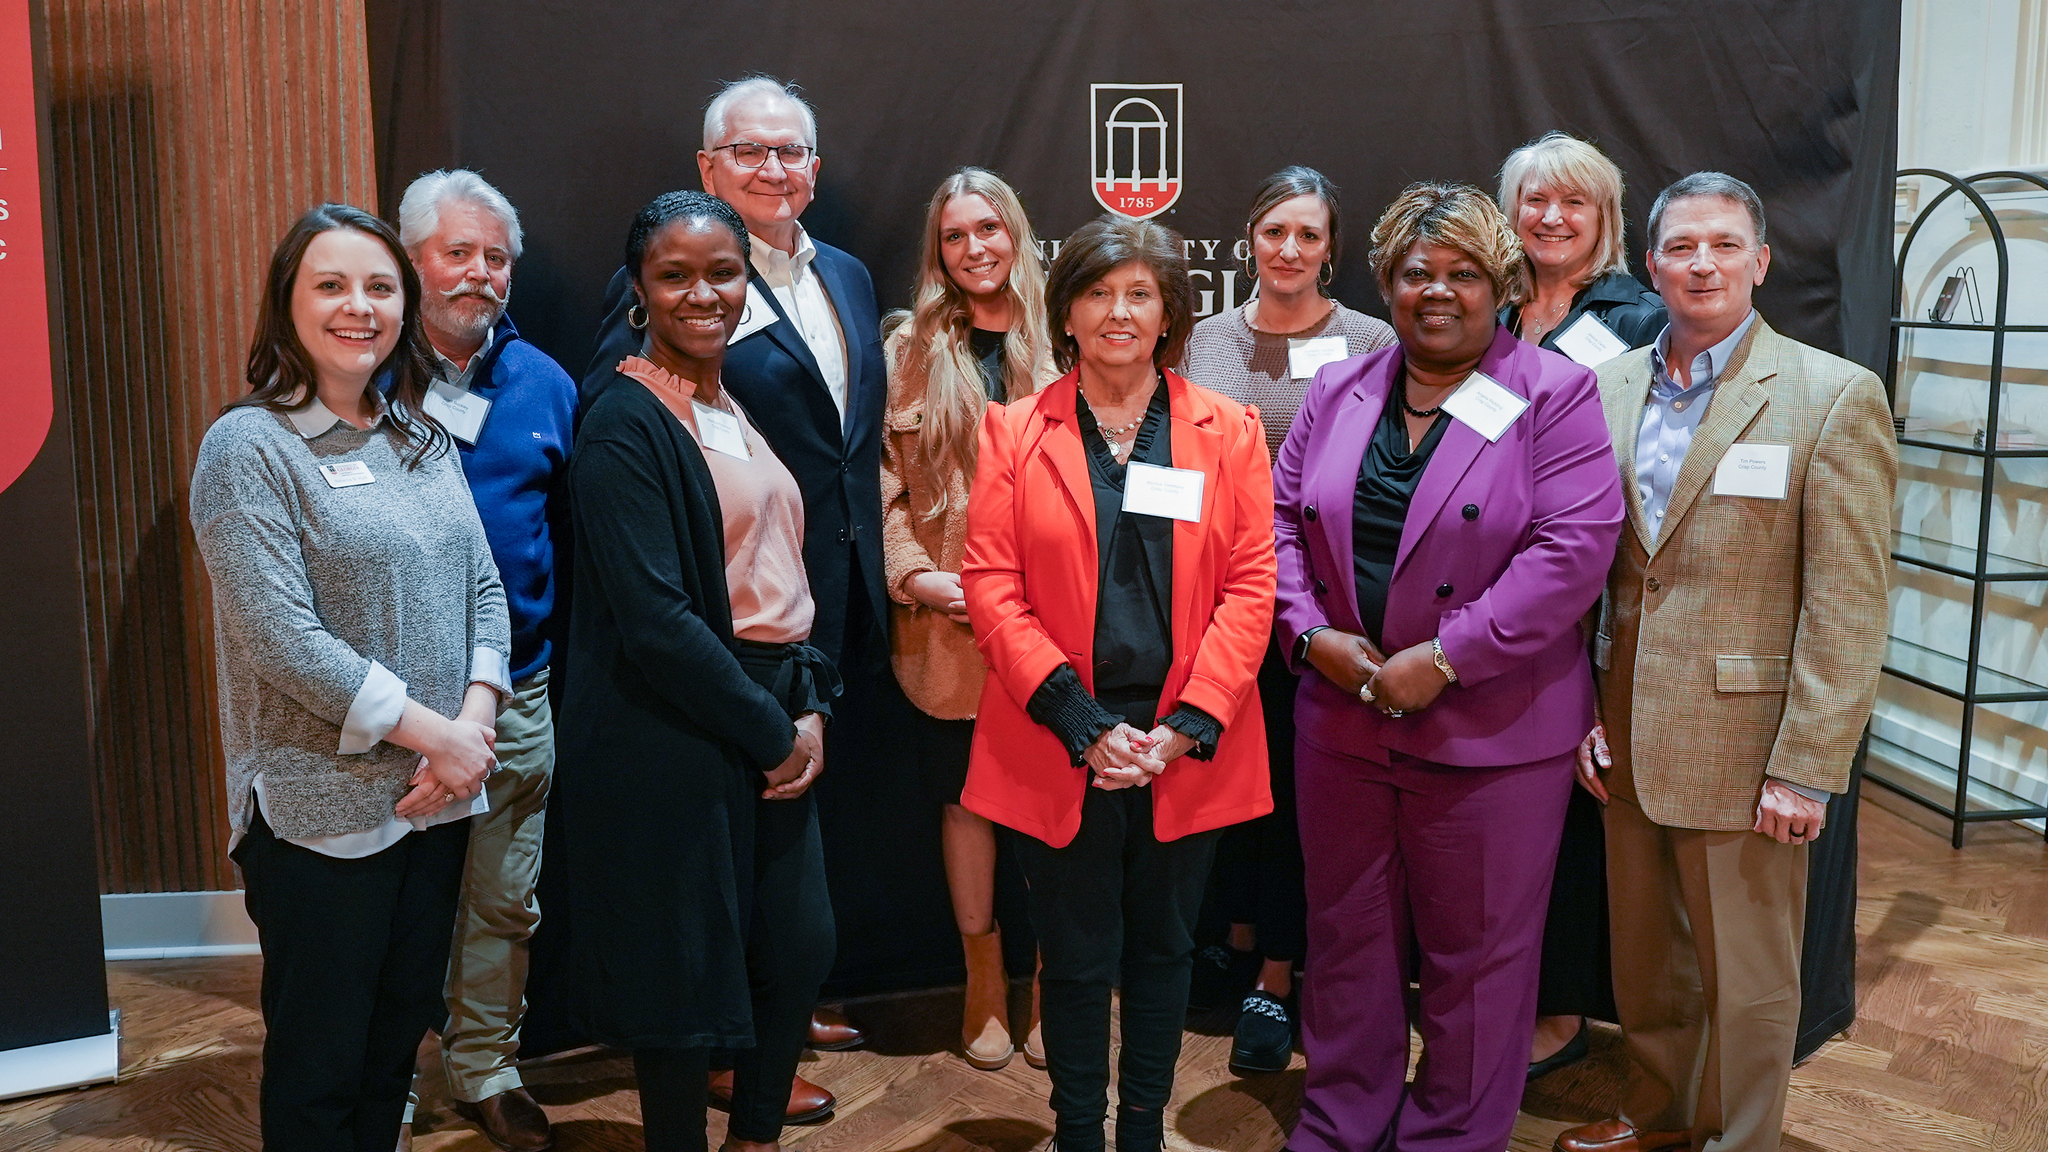 Crisp County’s PROPEL steering committee members say they would like to strengthen partnerships and capitalize on their community’s potential as part of the PROPEL program